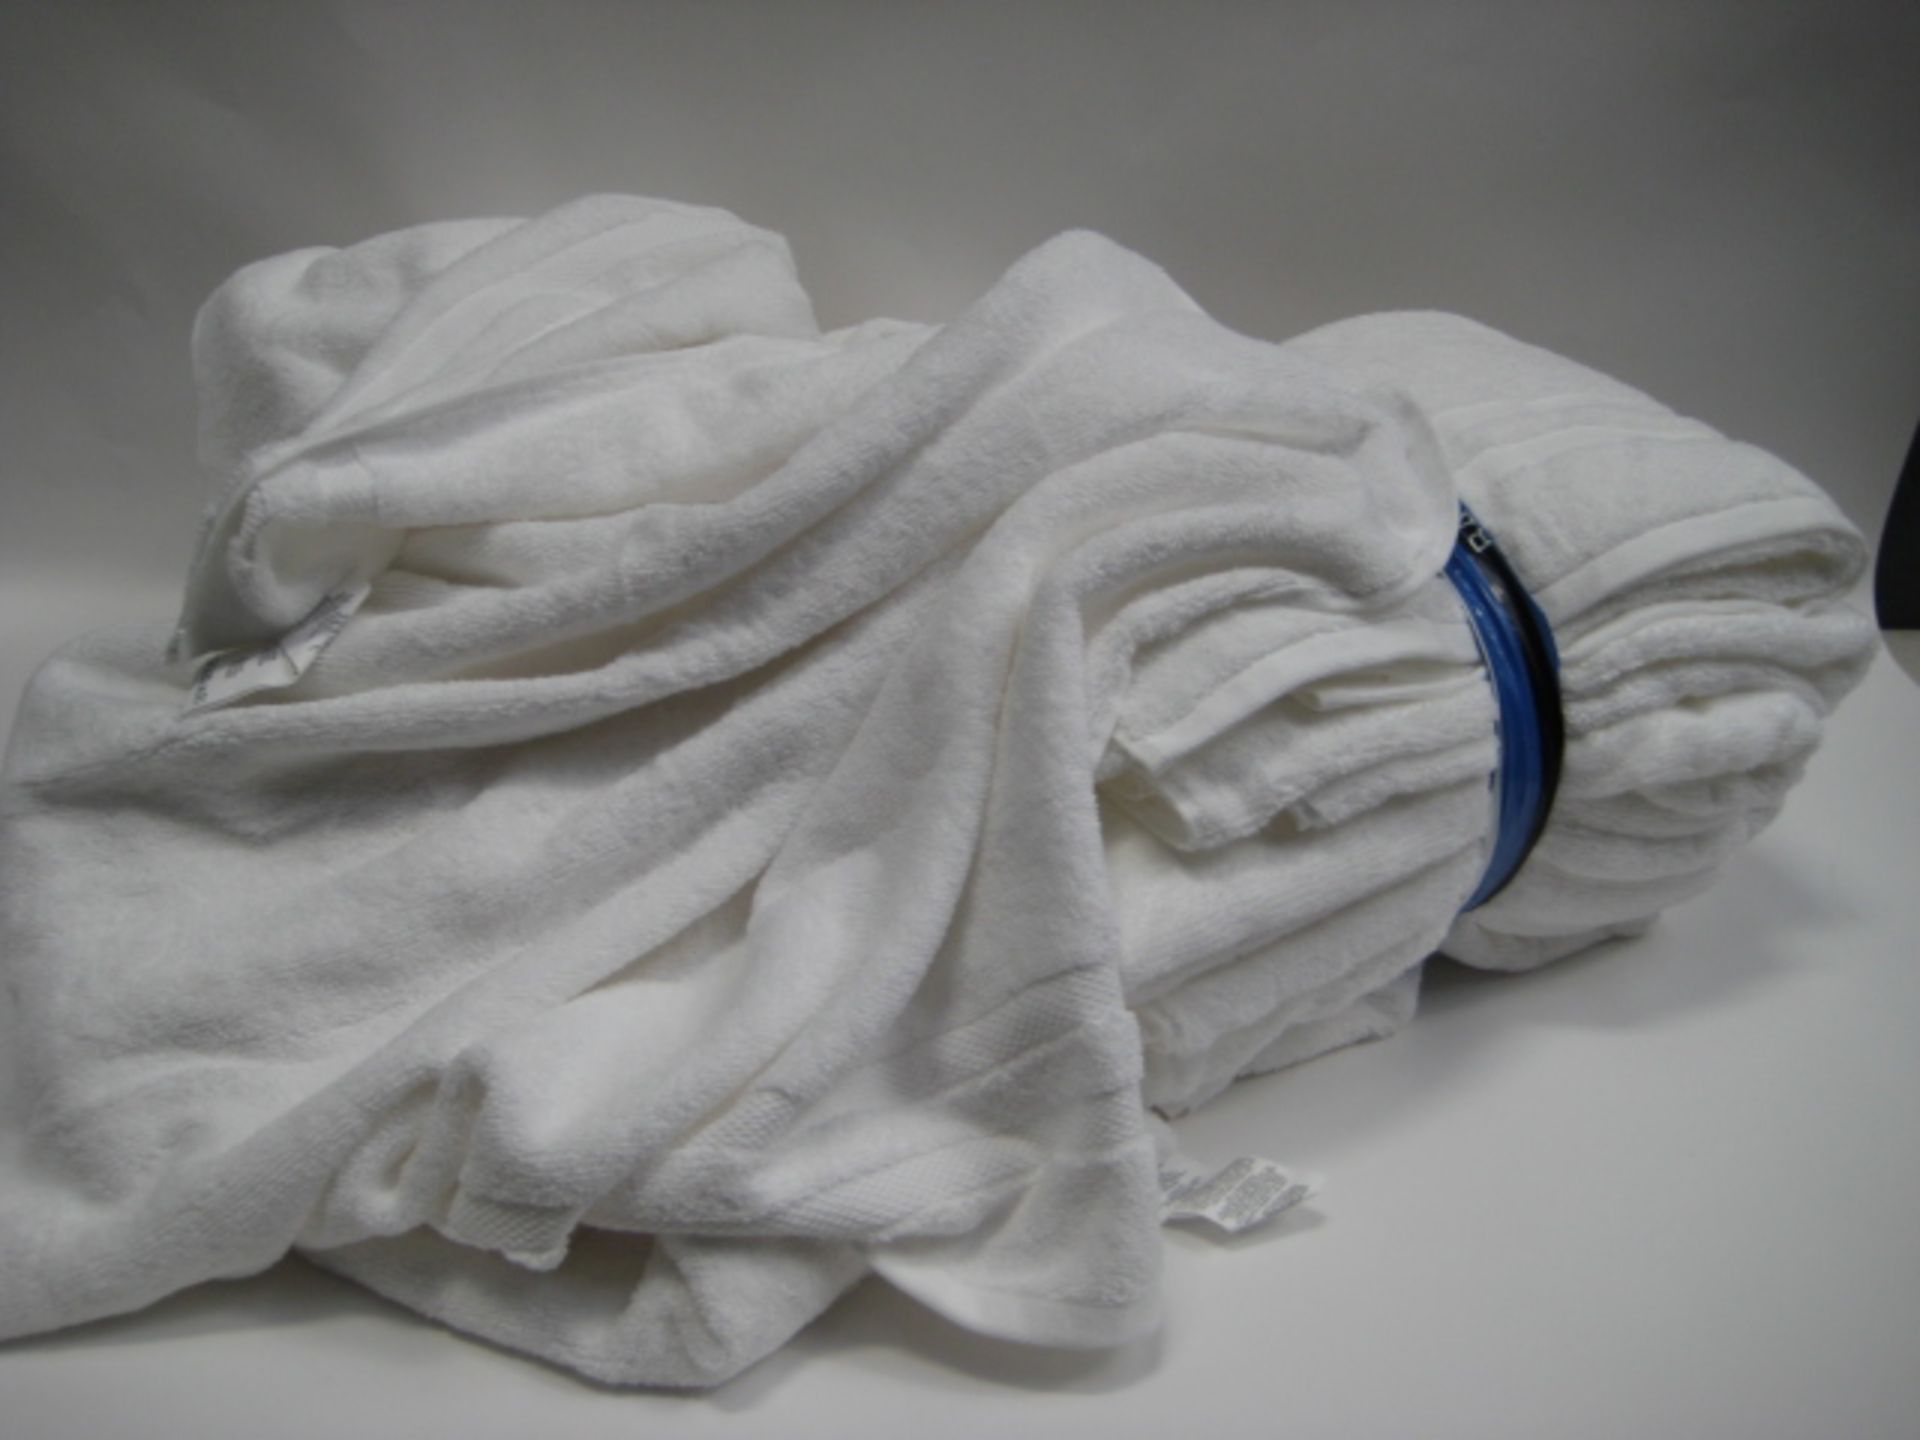 Bag containing a qty of white towels, mostly bath towel sized